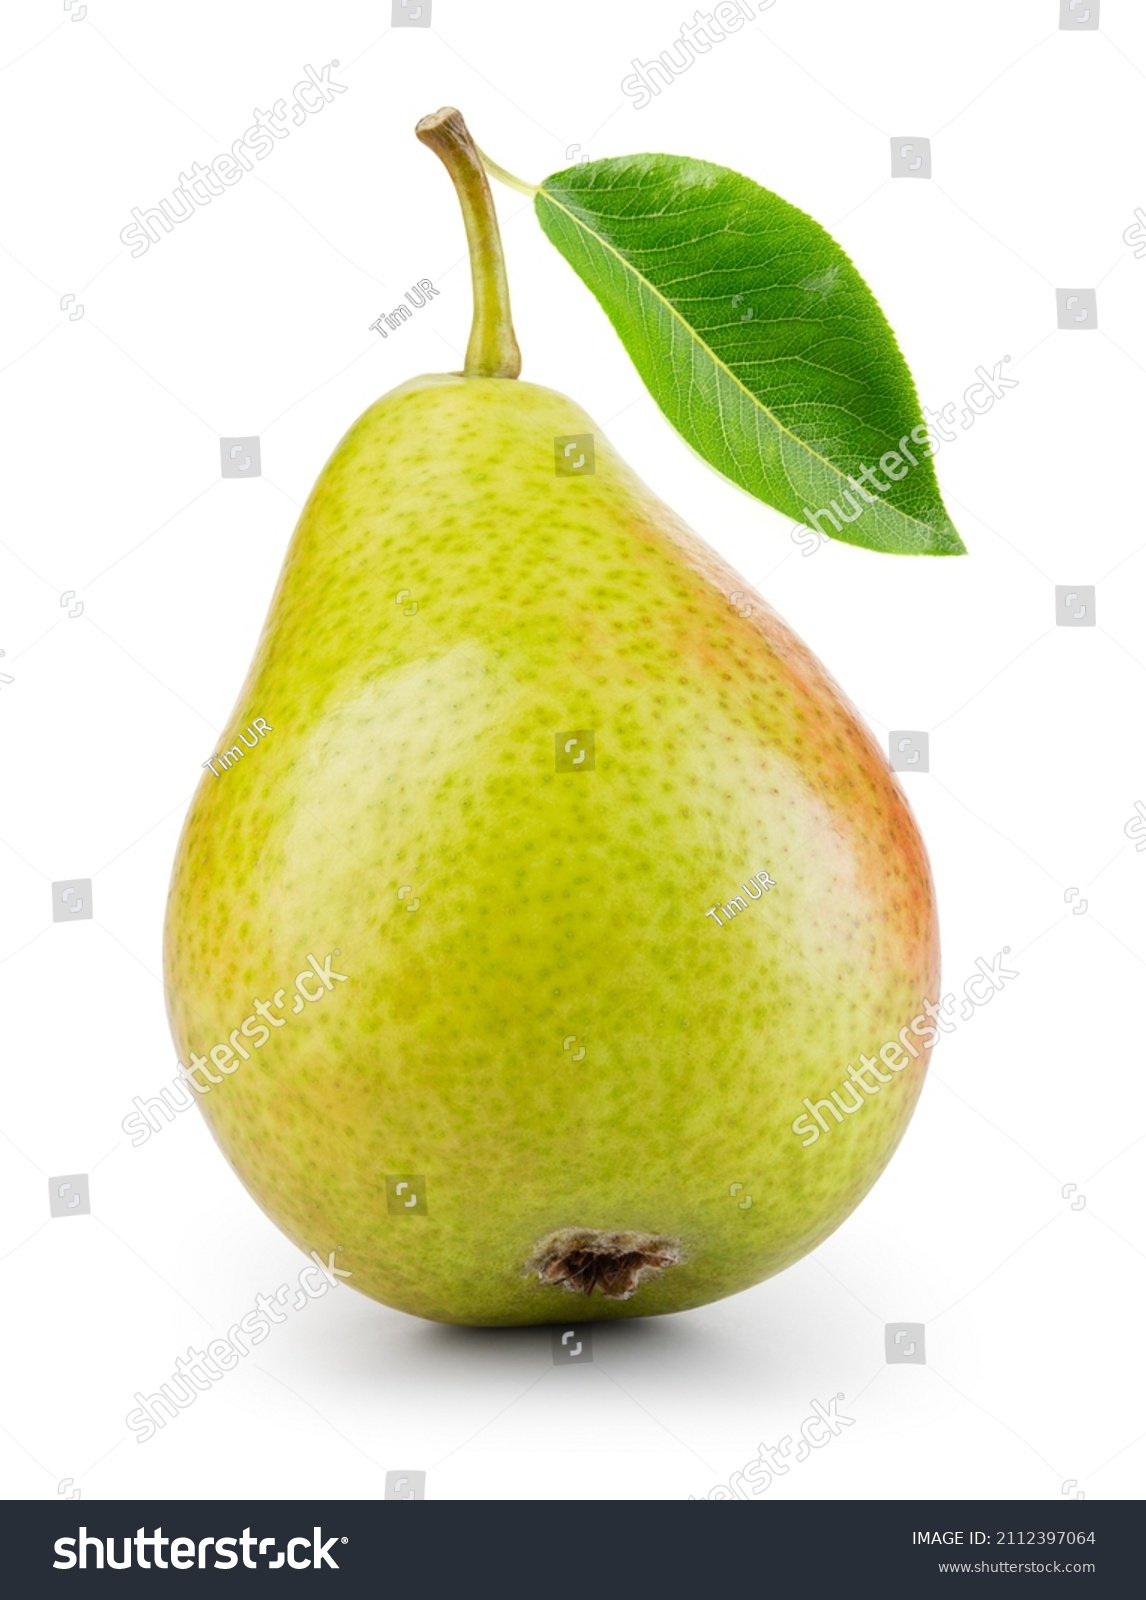 Pear isolated. Green pear with leaf on white background. With clipping path. Full depth of field.  #2112397064